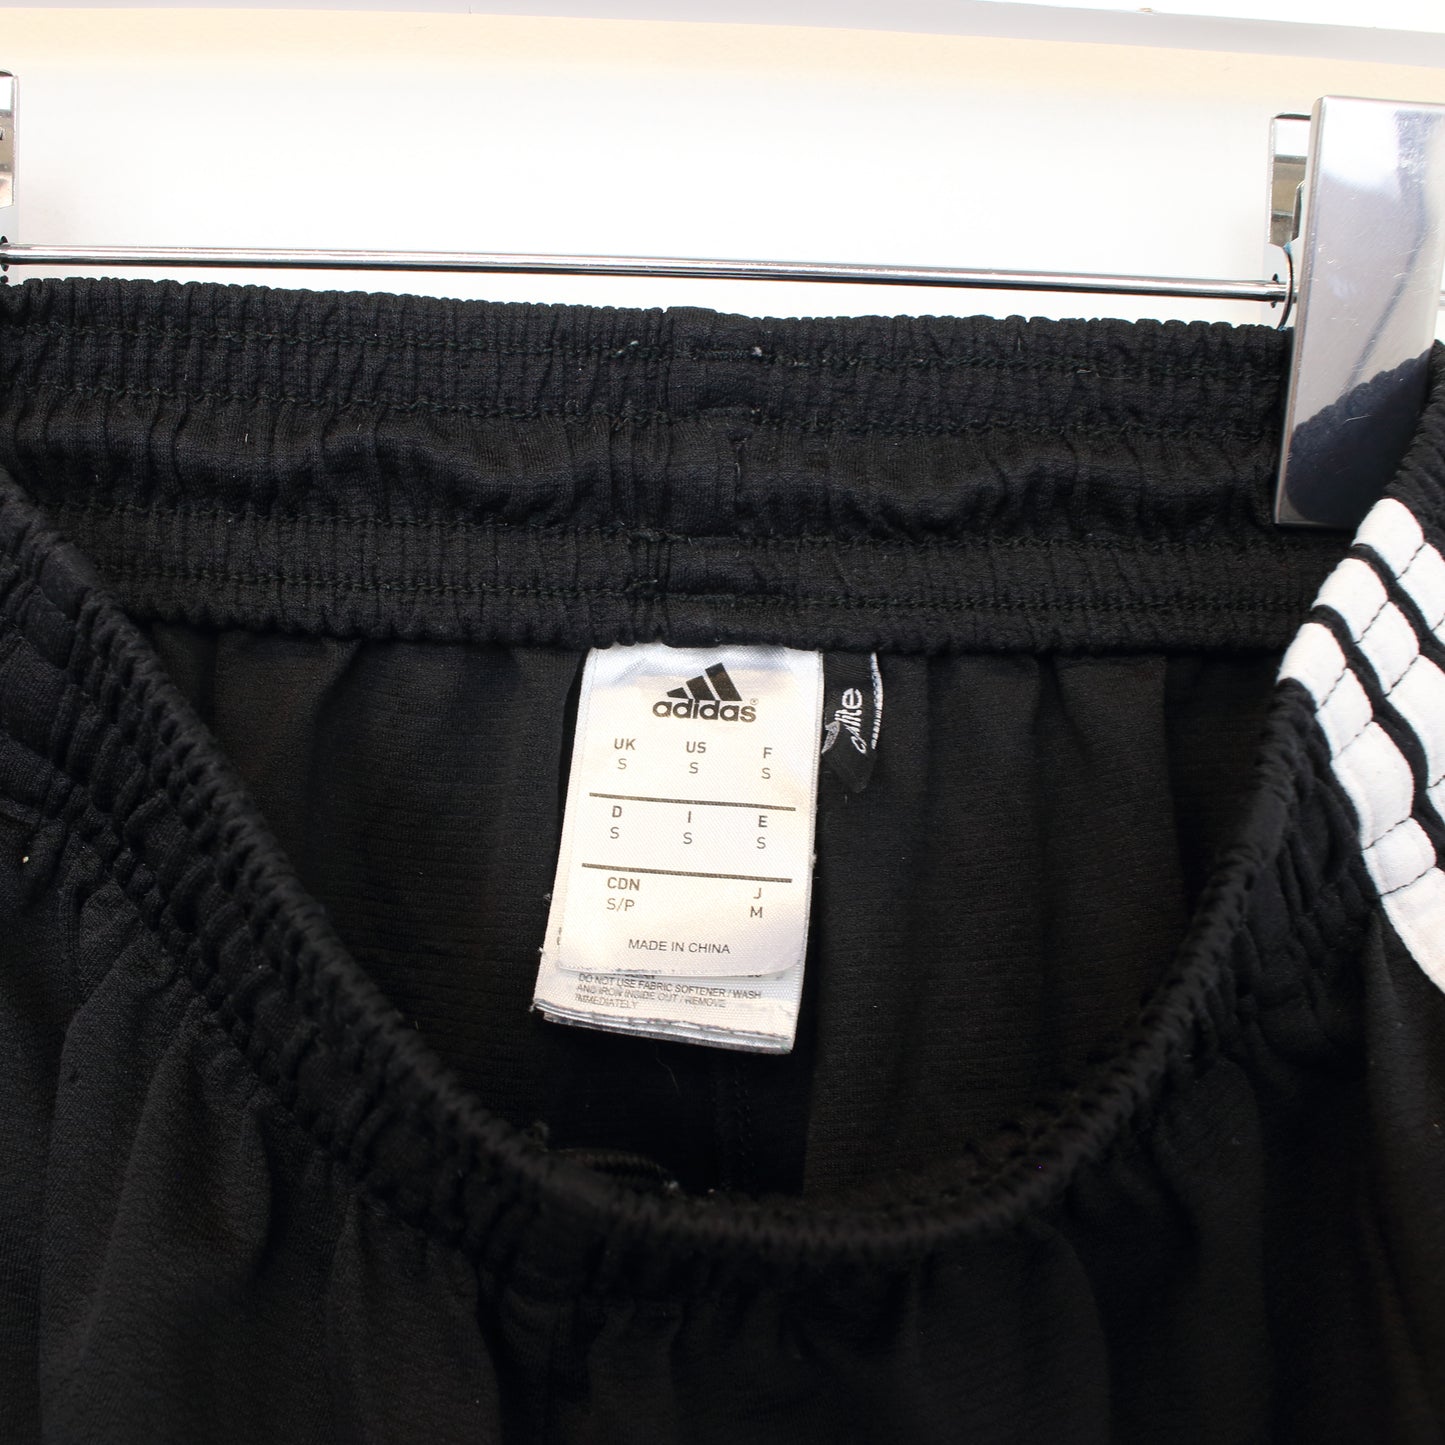 Vintage Adidas shorts in black and white. Best fits XS